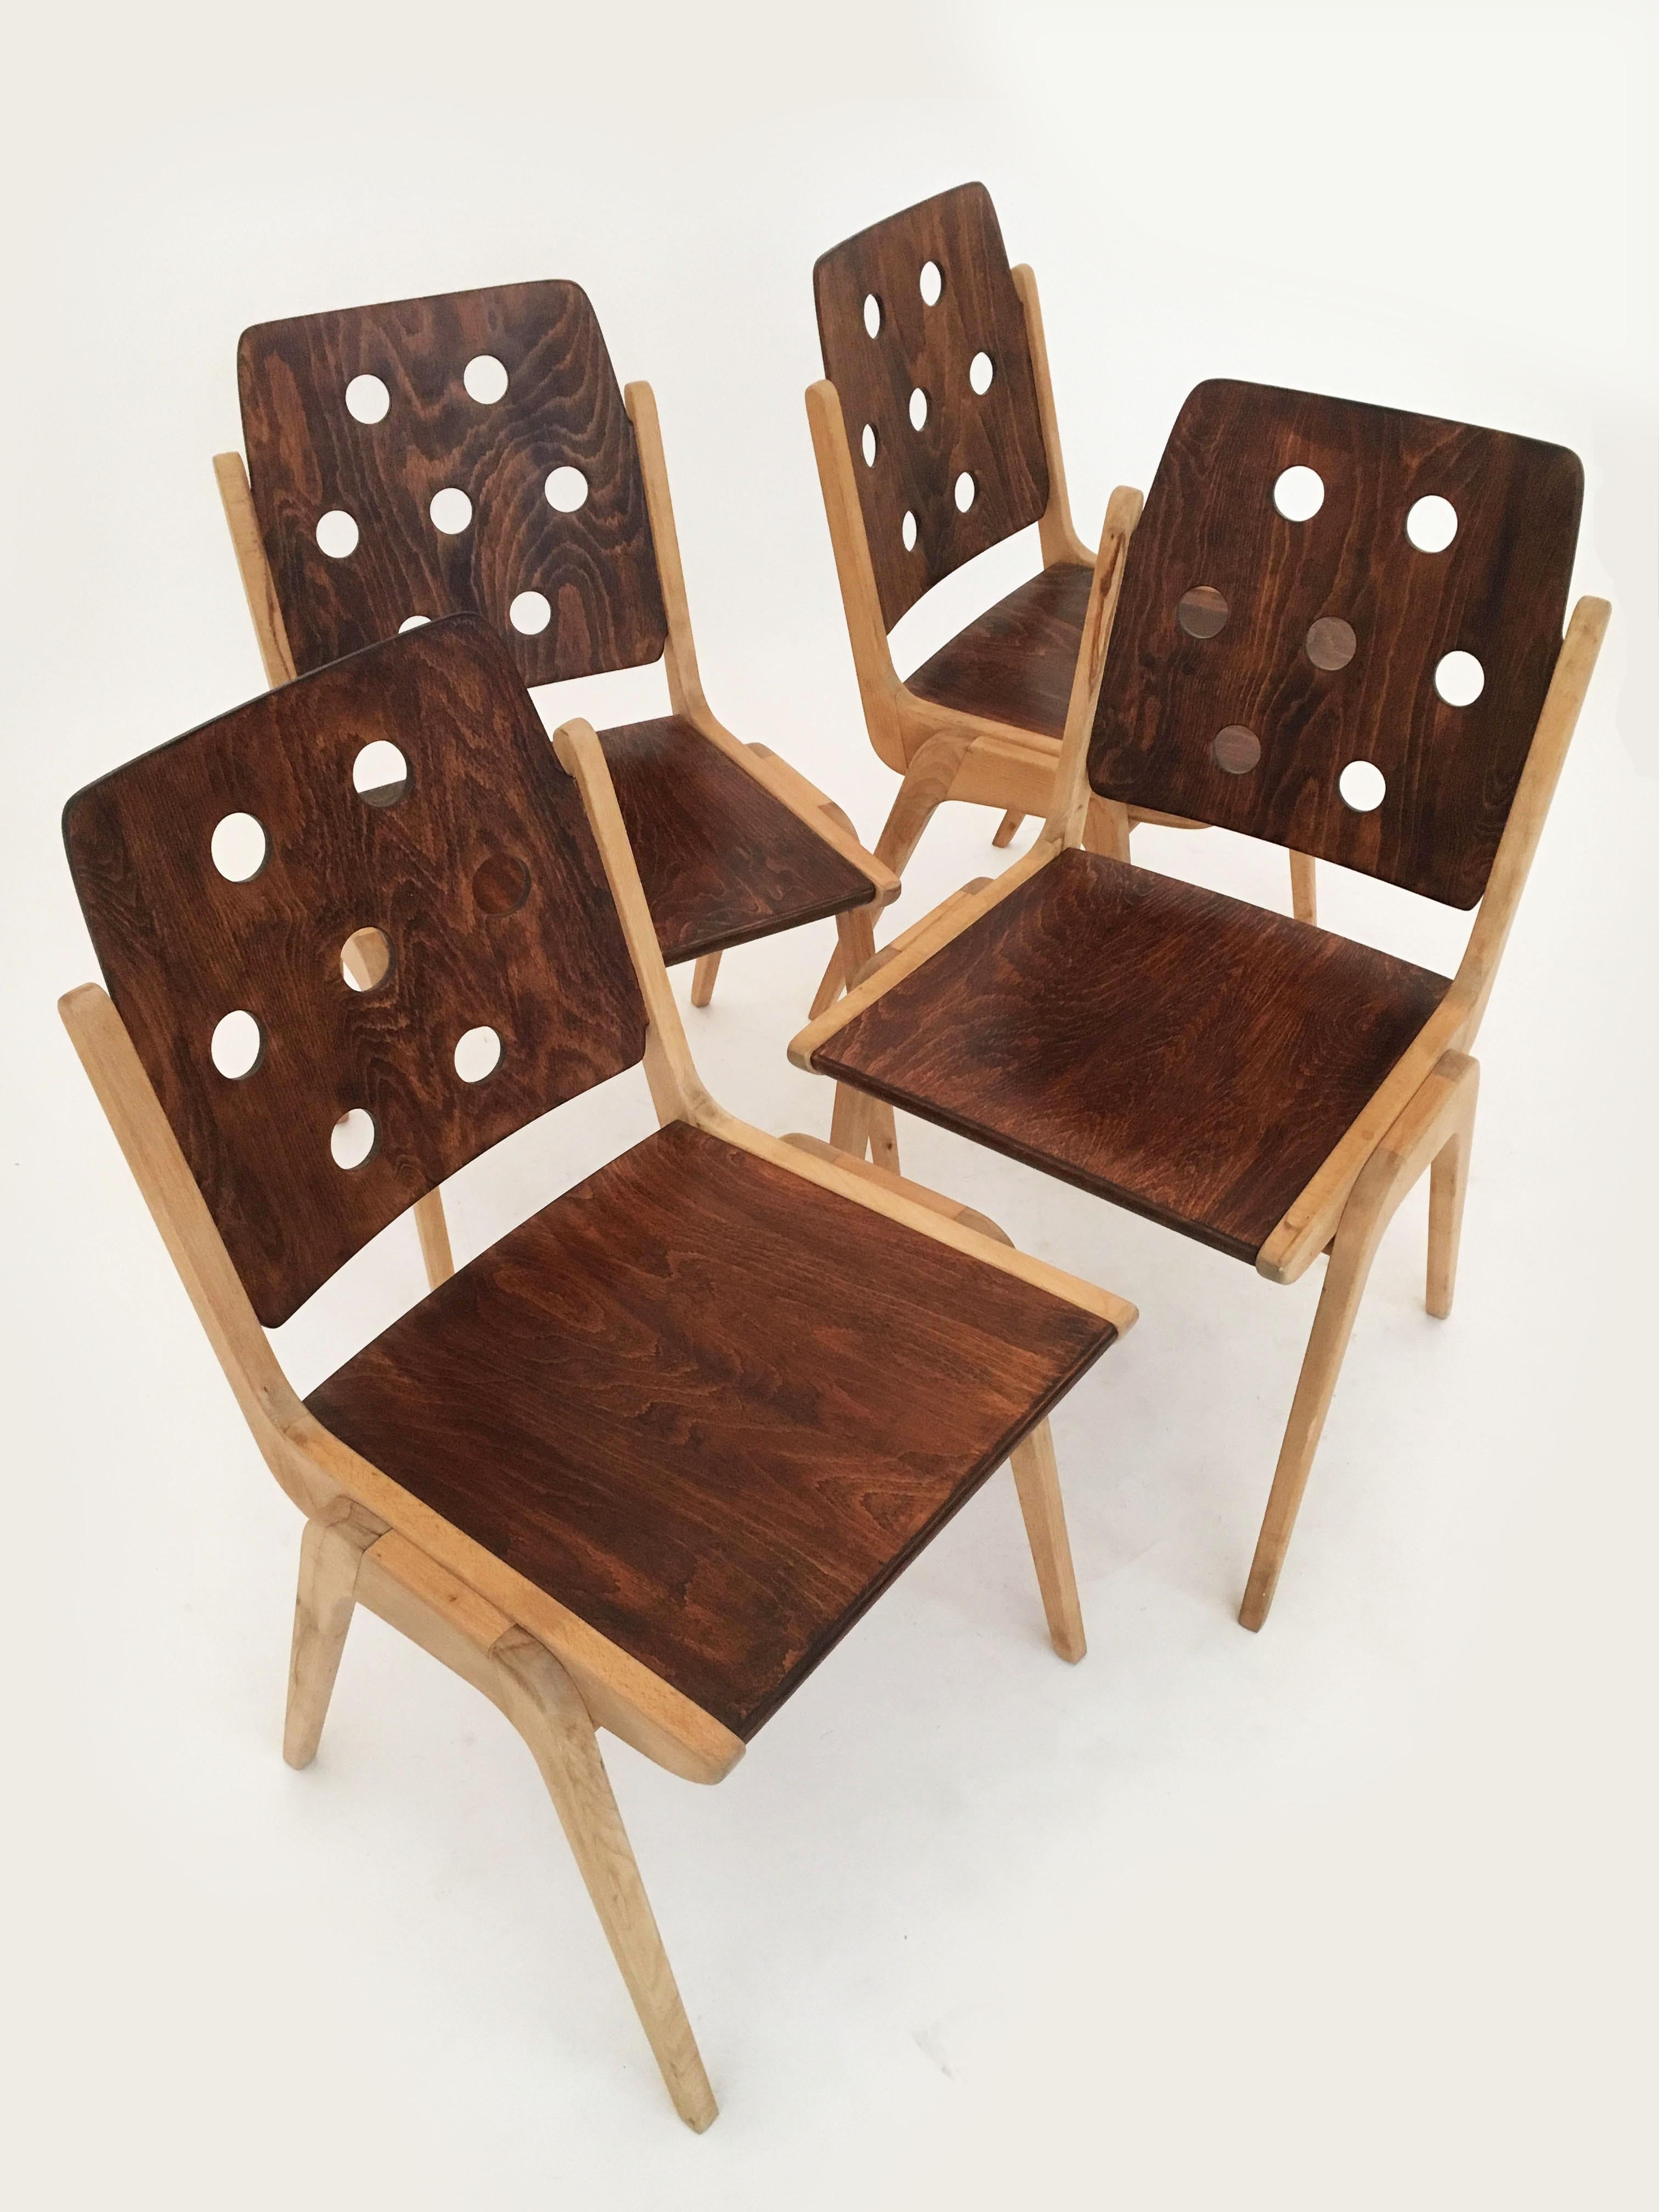 Set of Four Stacking Chairs Franz Schuster, Duo-Colored, Austria 1950s For Sale 5